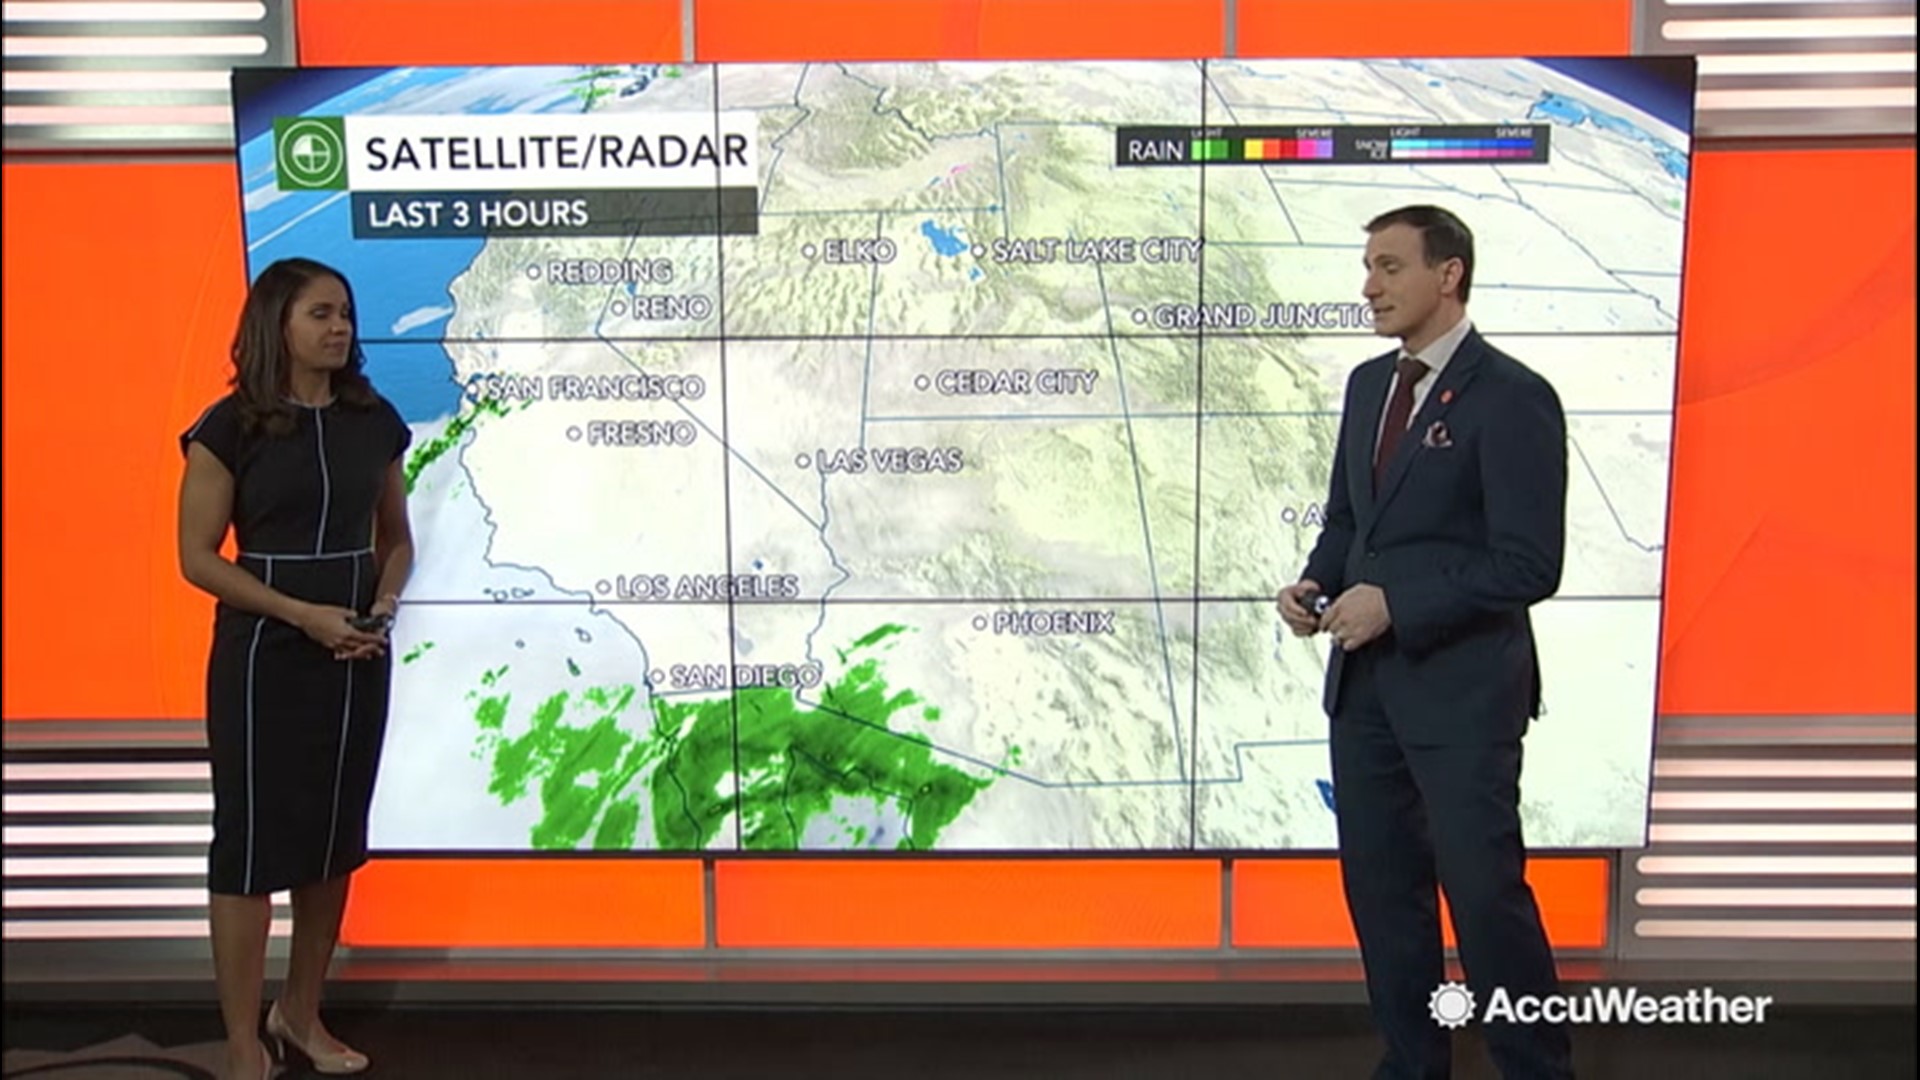 AccuWeather's Jonathan Petramala is live from the Tampa Bay area in Florida, where things are colder than you'd expect on Dec. 3.